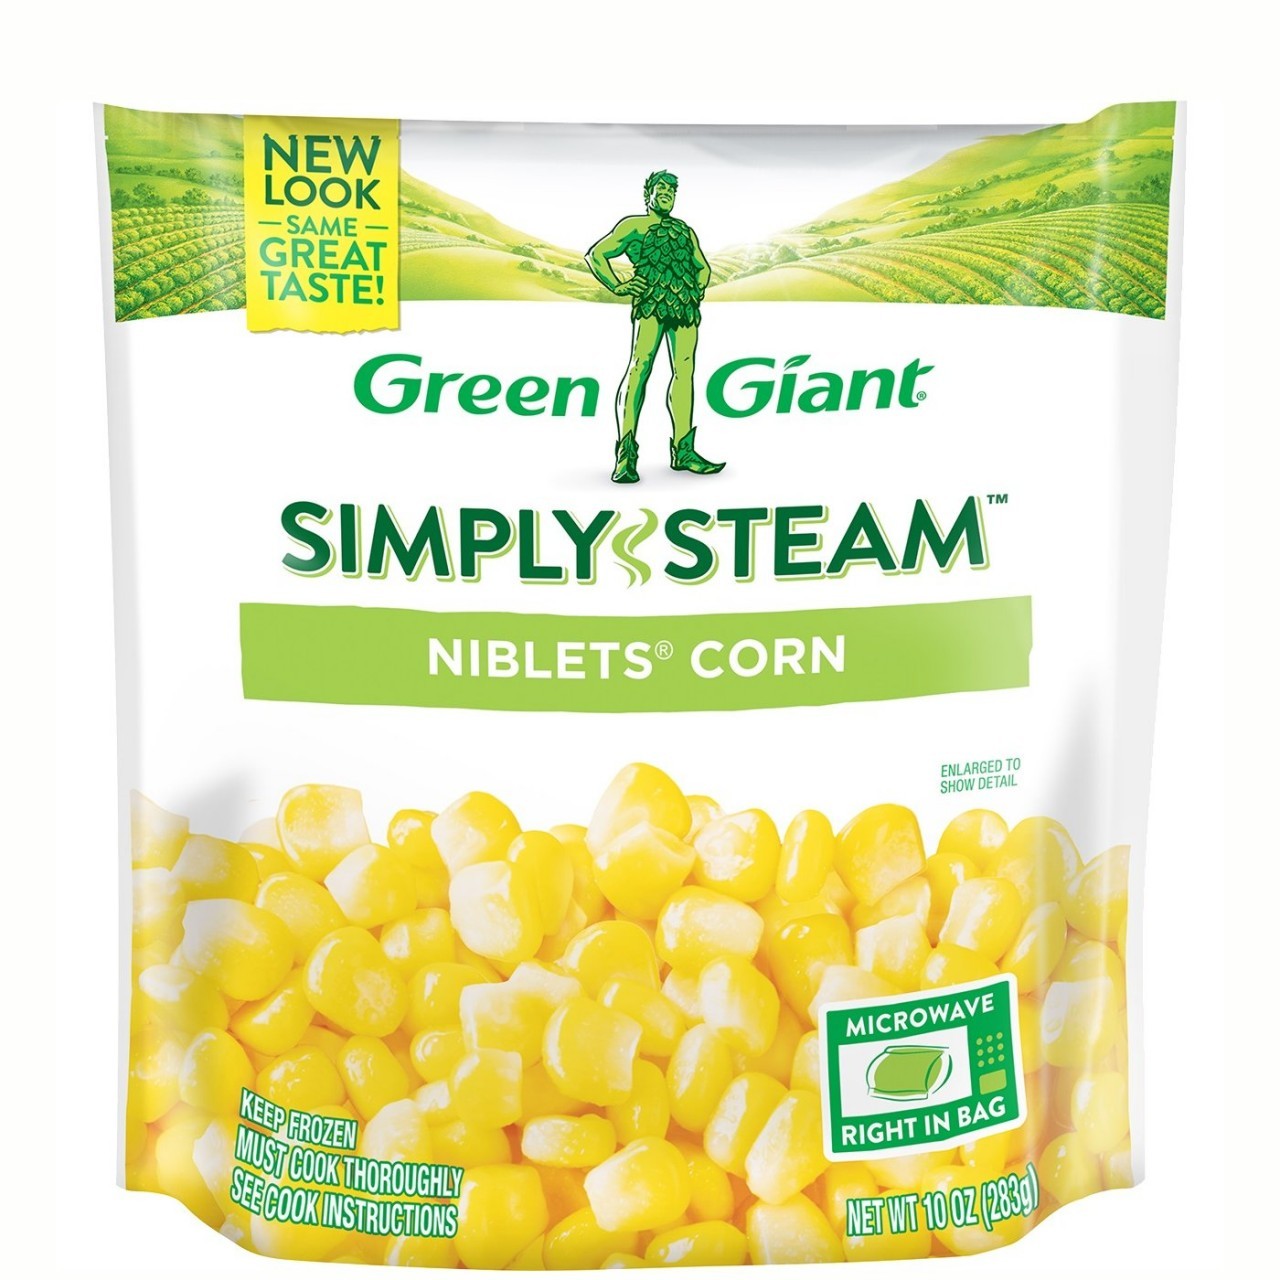 GREEN GIANT SIMPLY STEAM NIBLETS SWEET CORN 10 oz(283g)